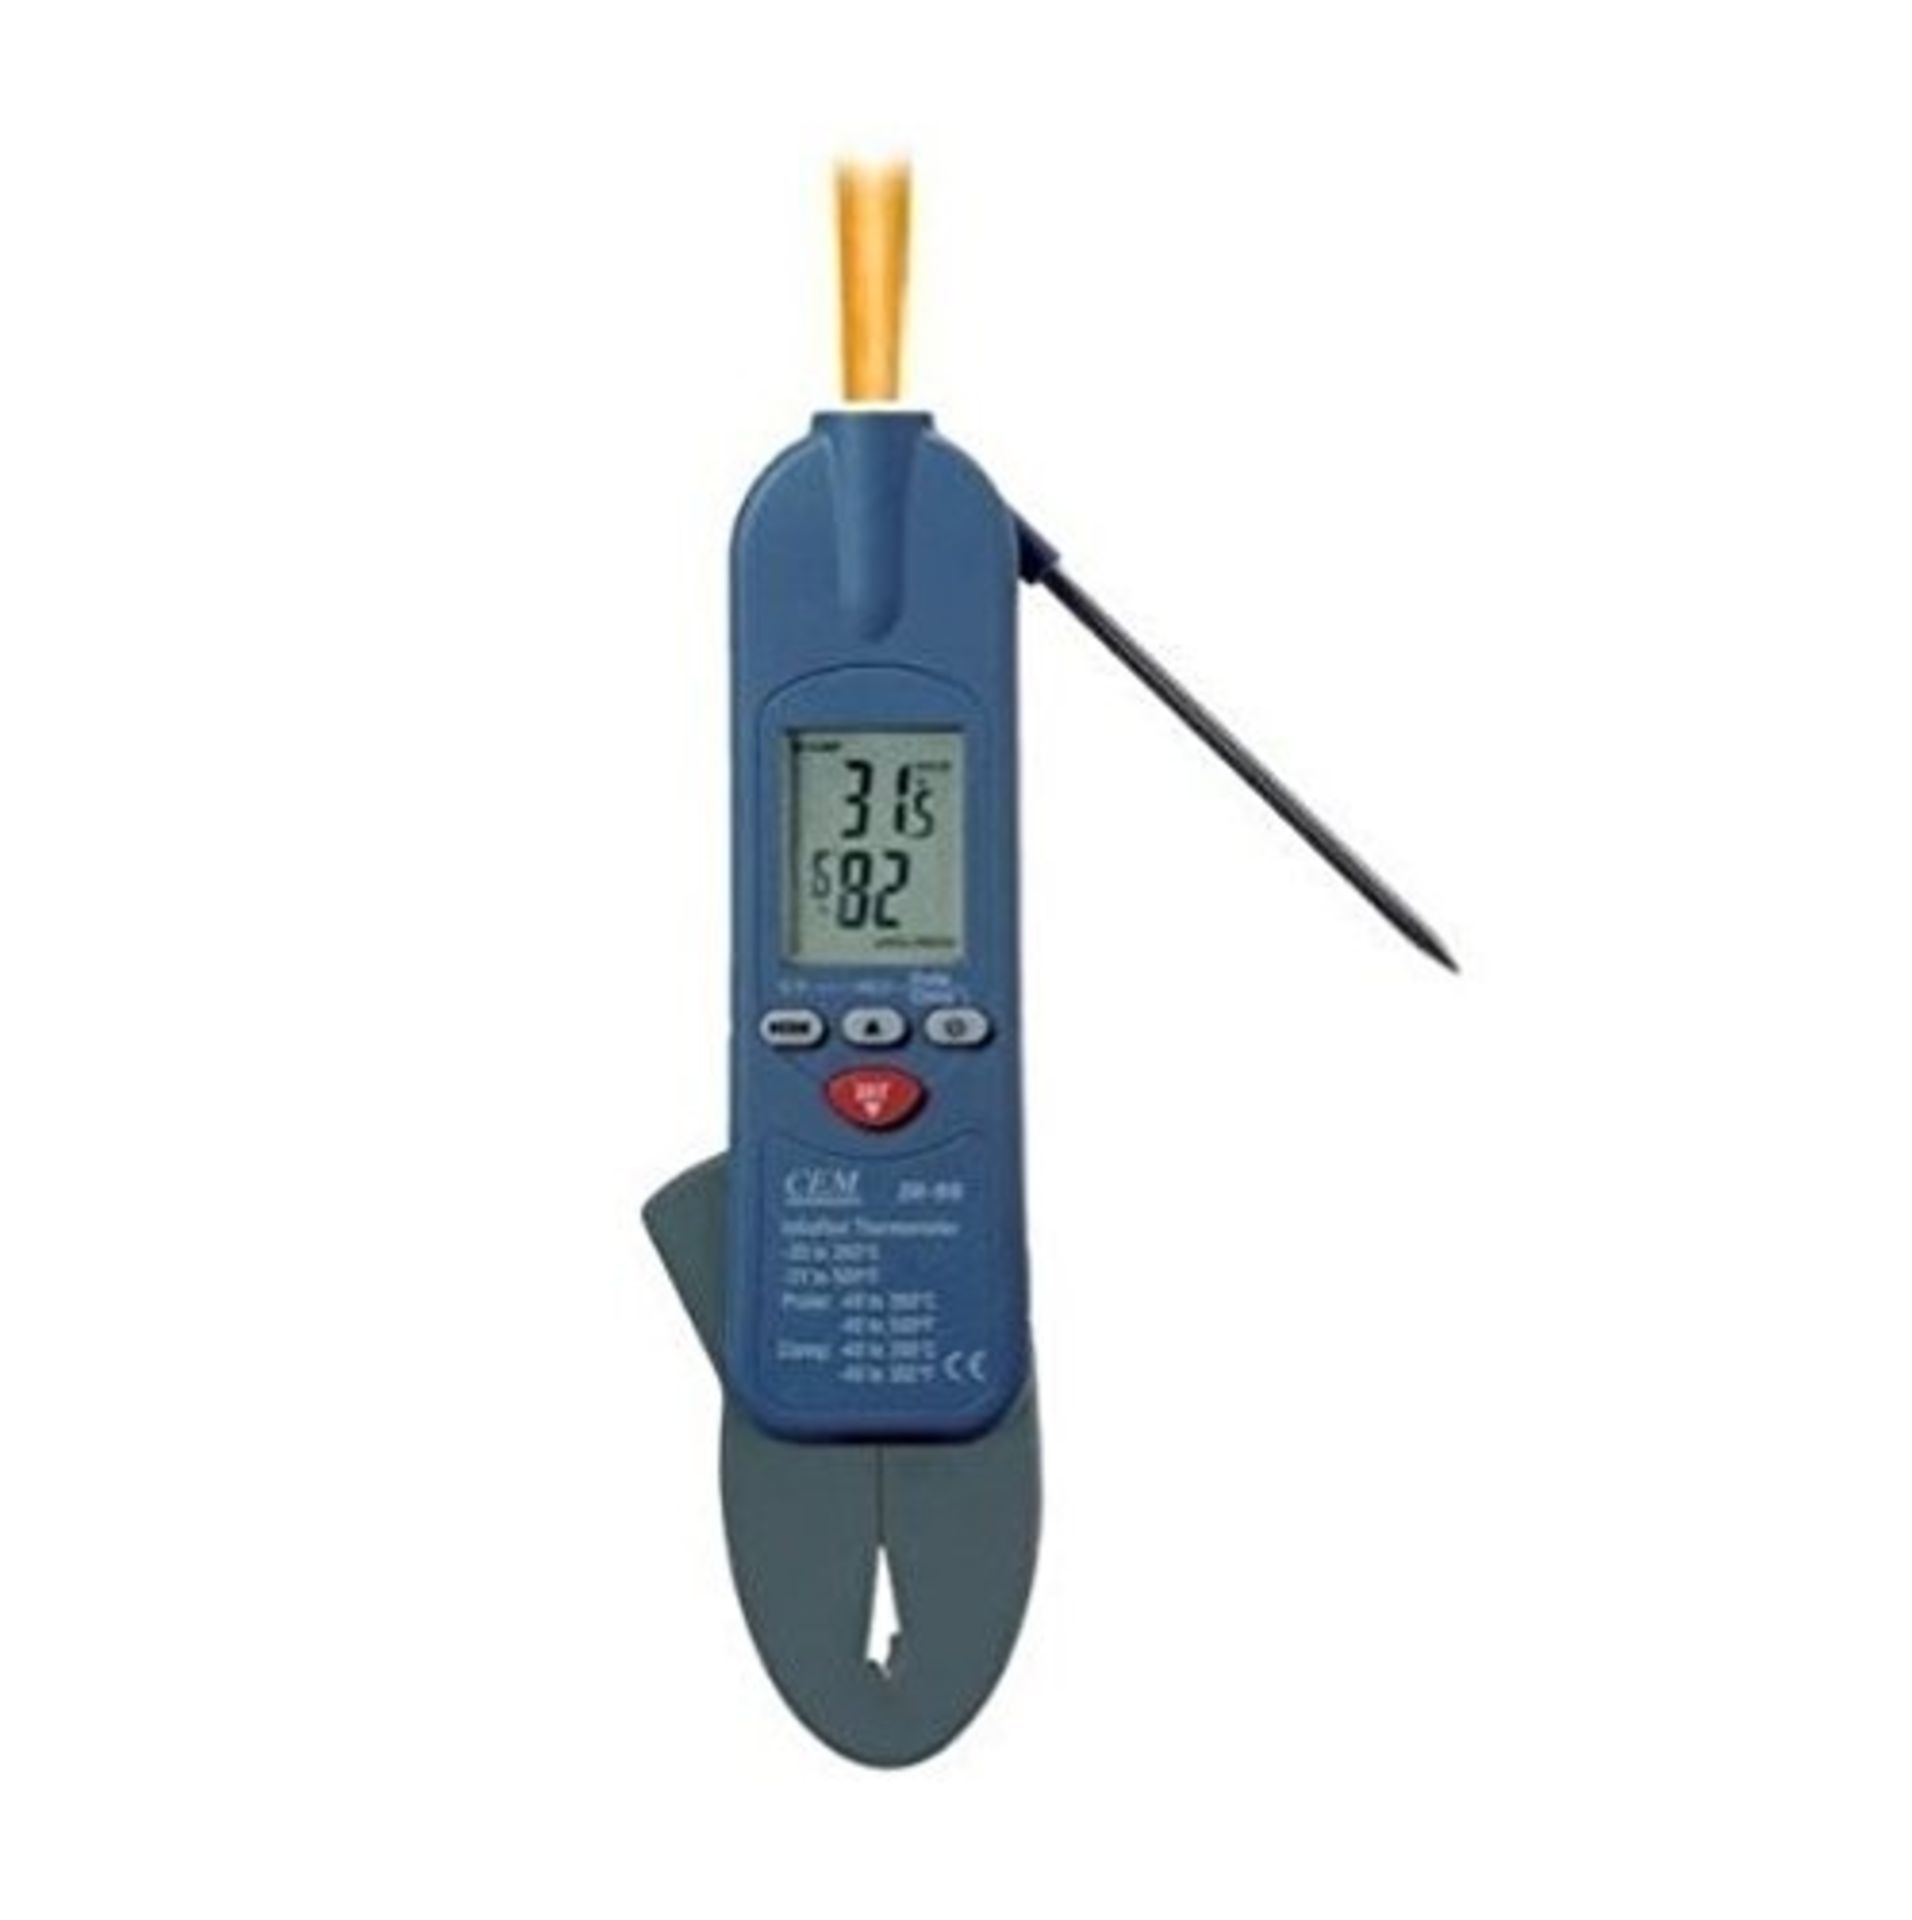 3 in 1 Clamp, Probe & Infrared Thermometer For L